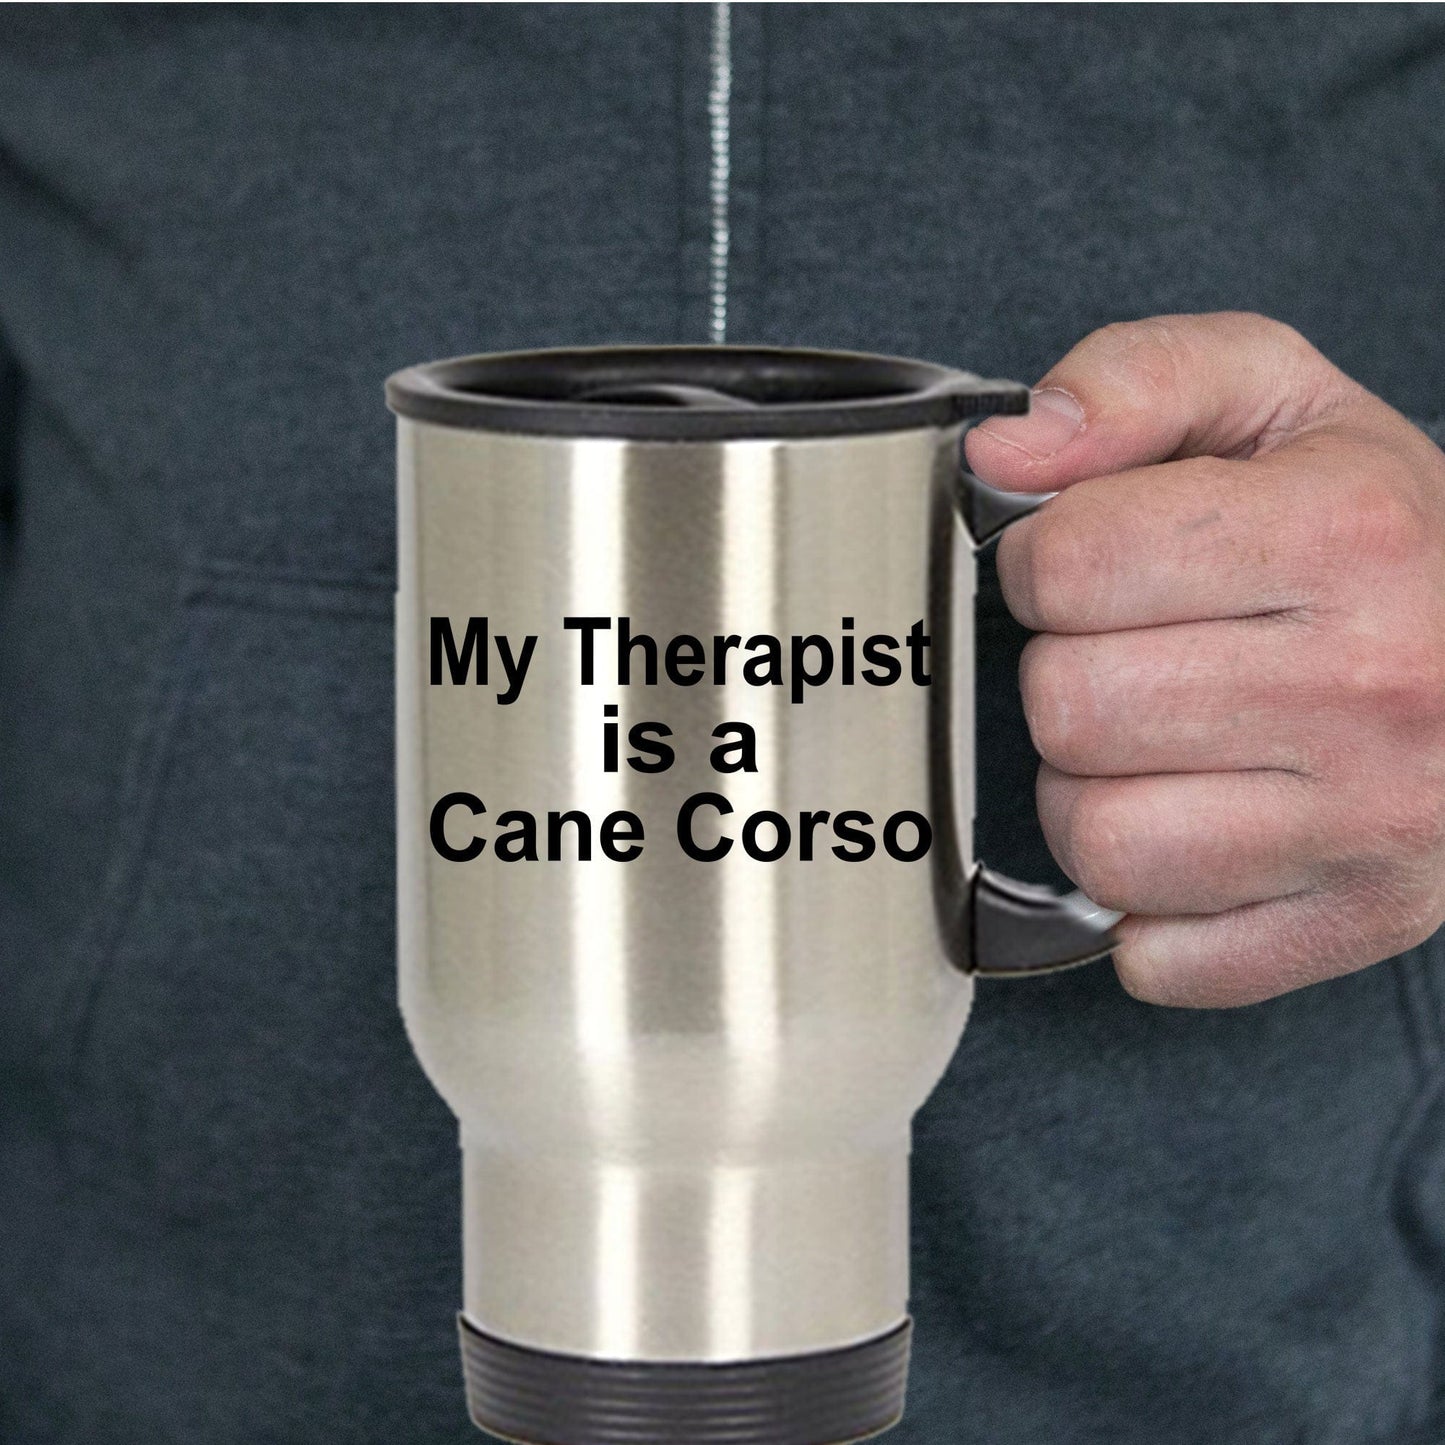 Cane Corso Dog Lover owner funny gift therapist stainless steel insulated travel coffee mug